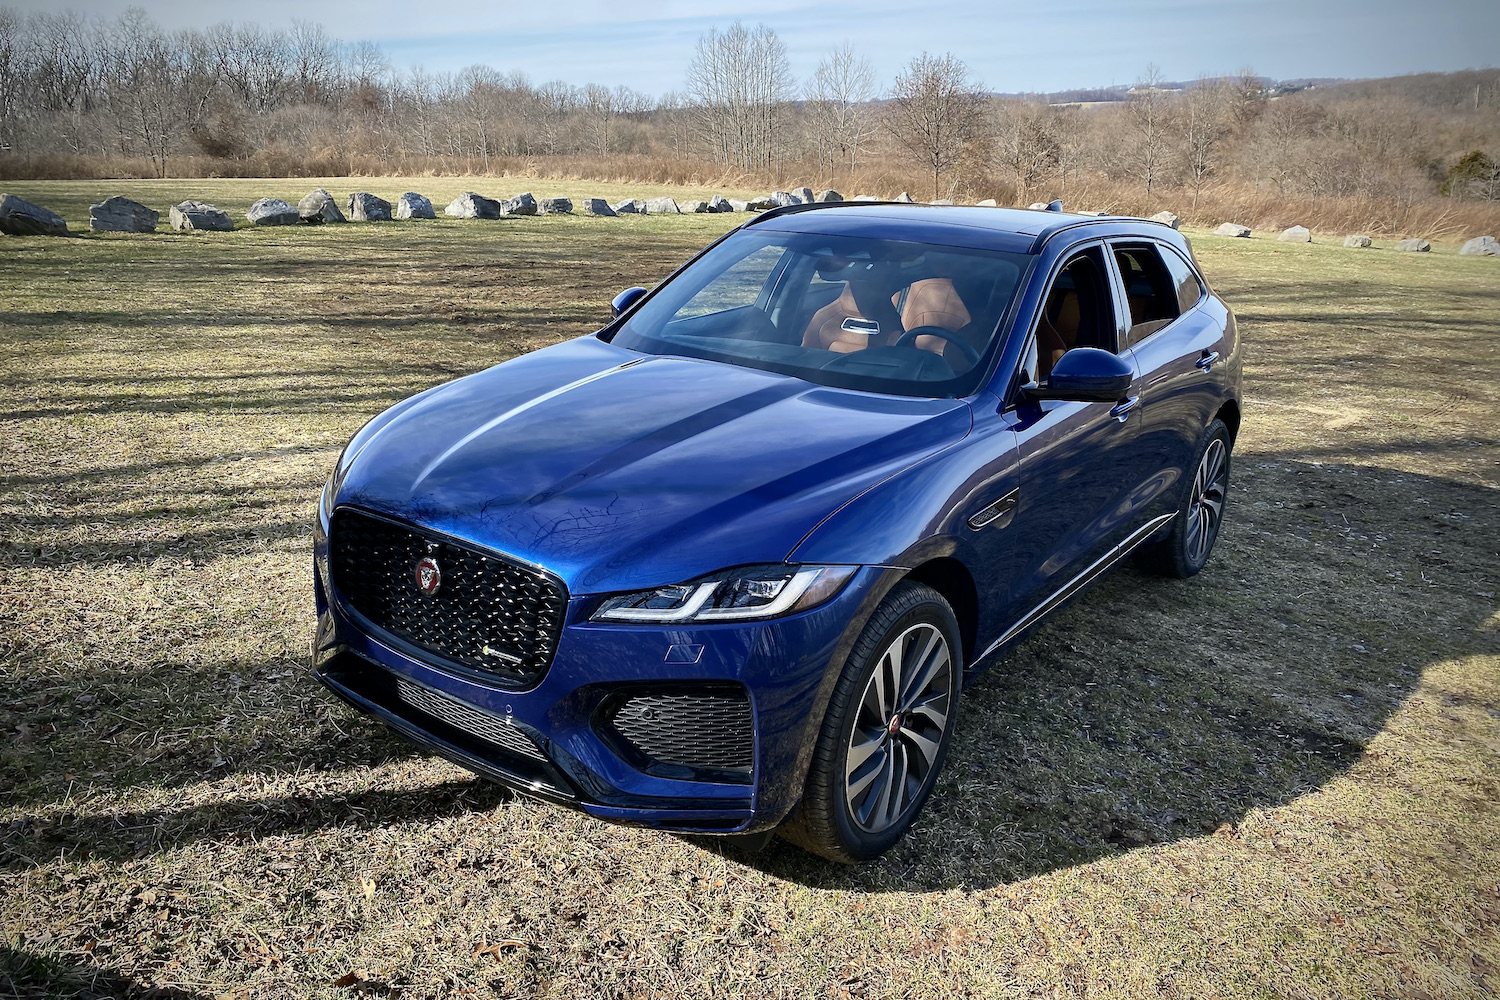 Full profile view of 2022 Jaguar F-Pace R Dynamic S in a grassy field with trees in the background.